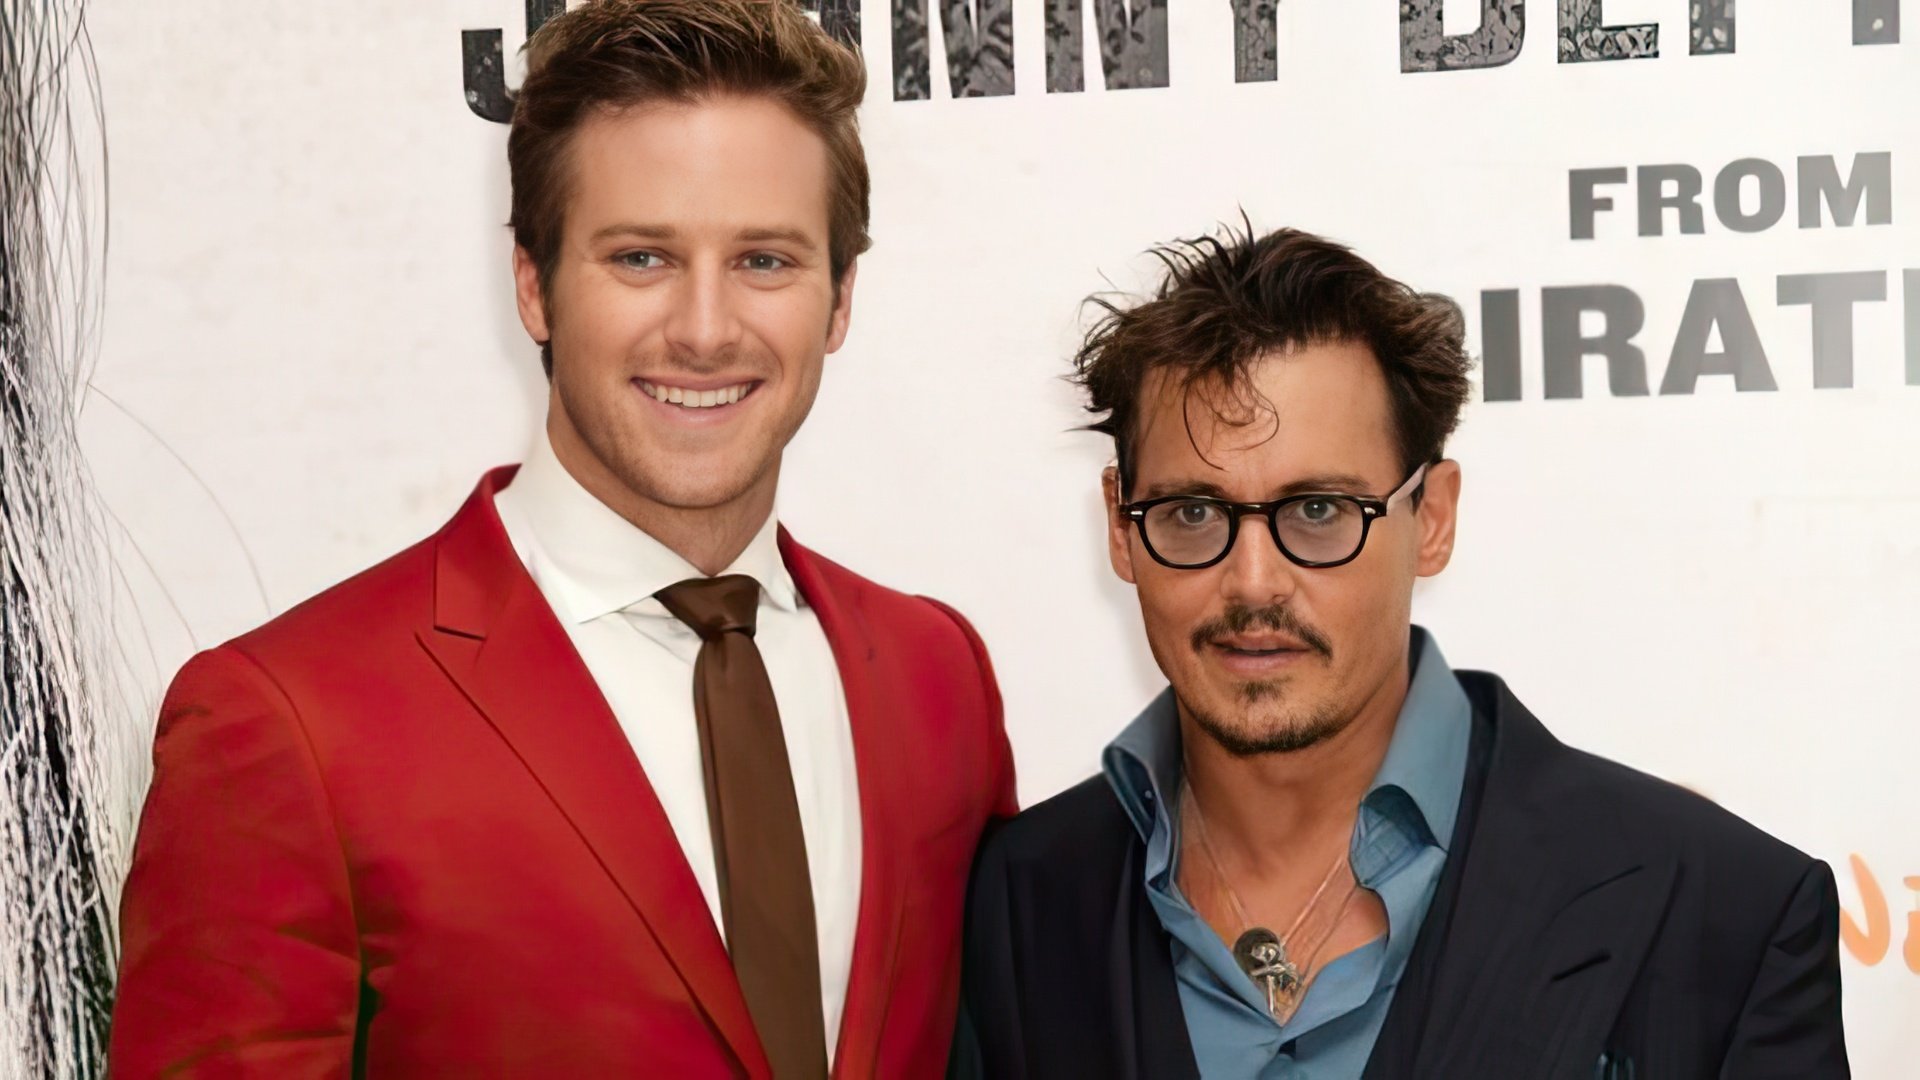  Armie Hammer together with Johnny Depp presented the film The Lone Ranger